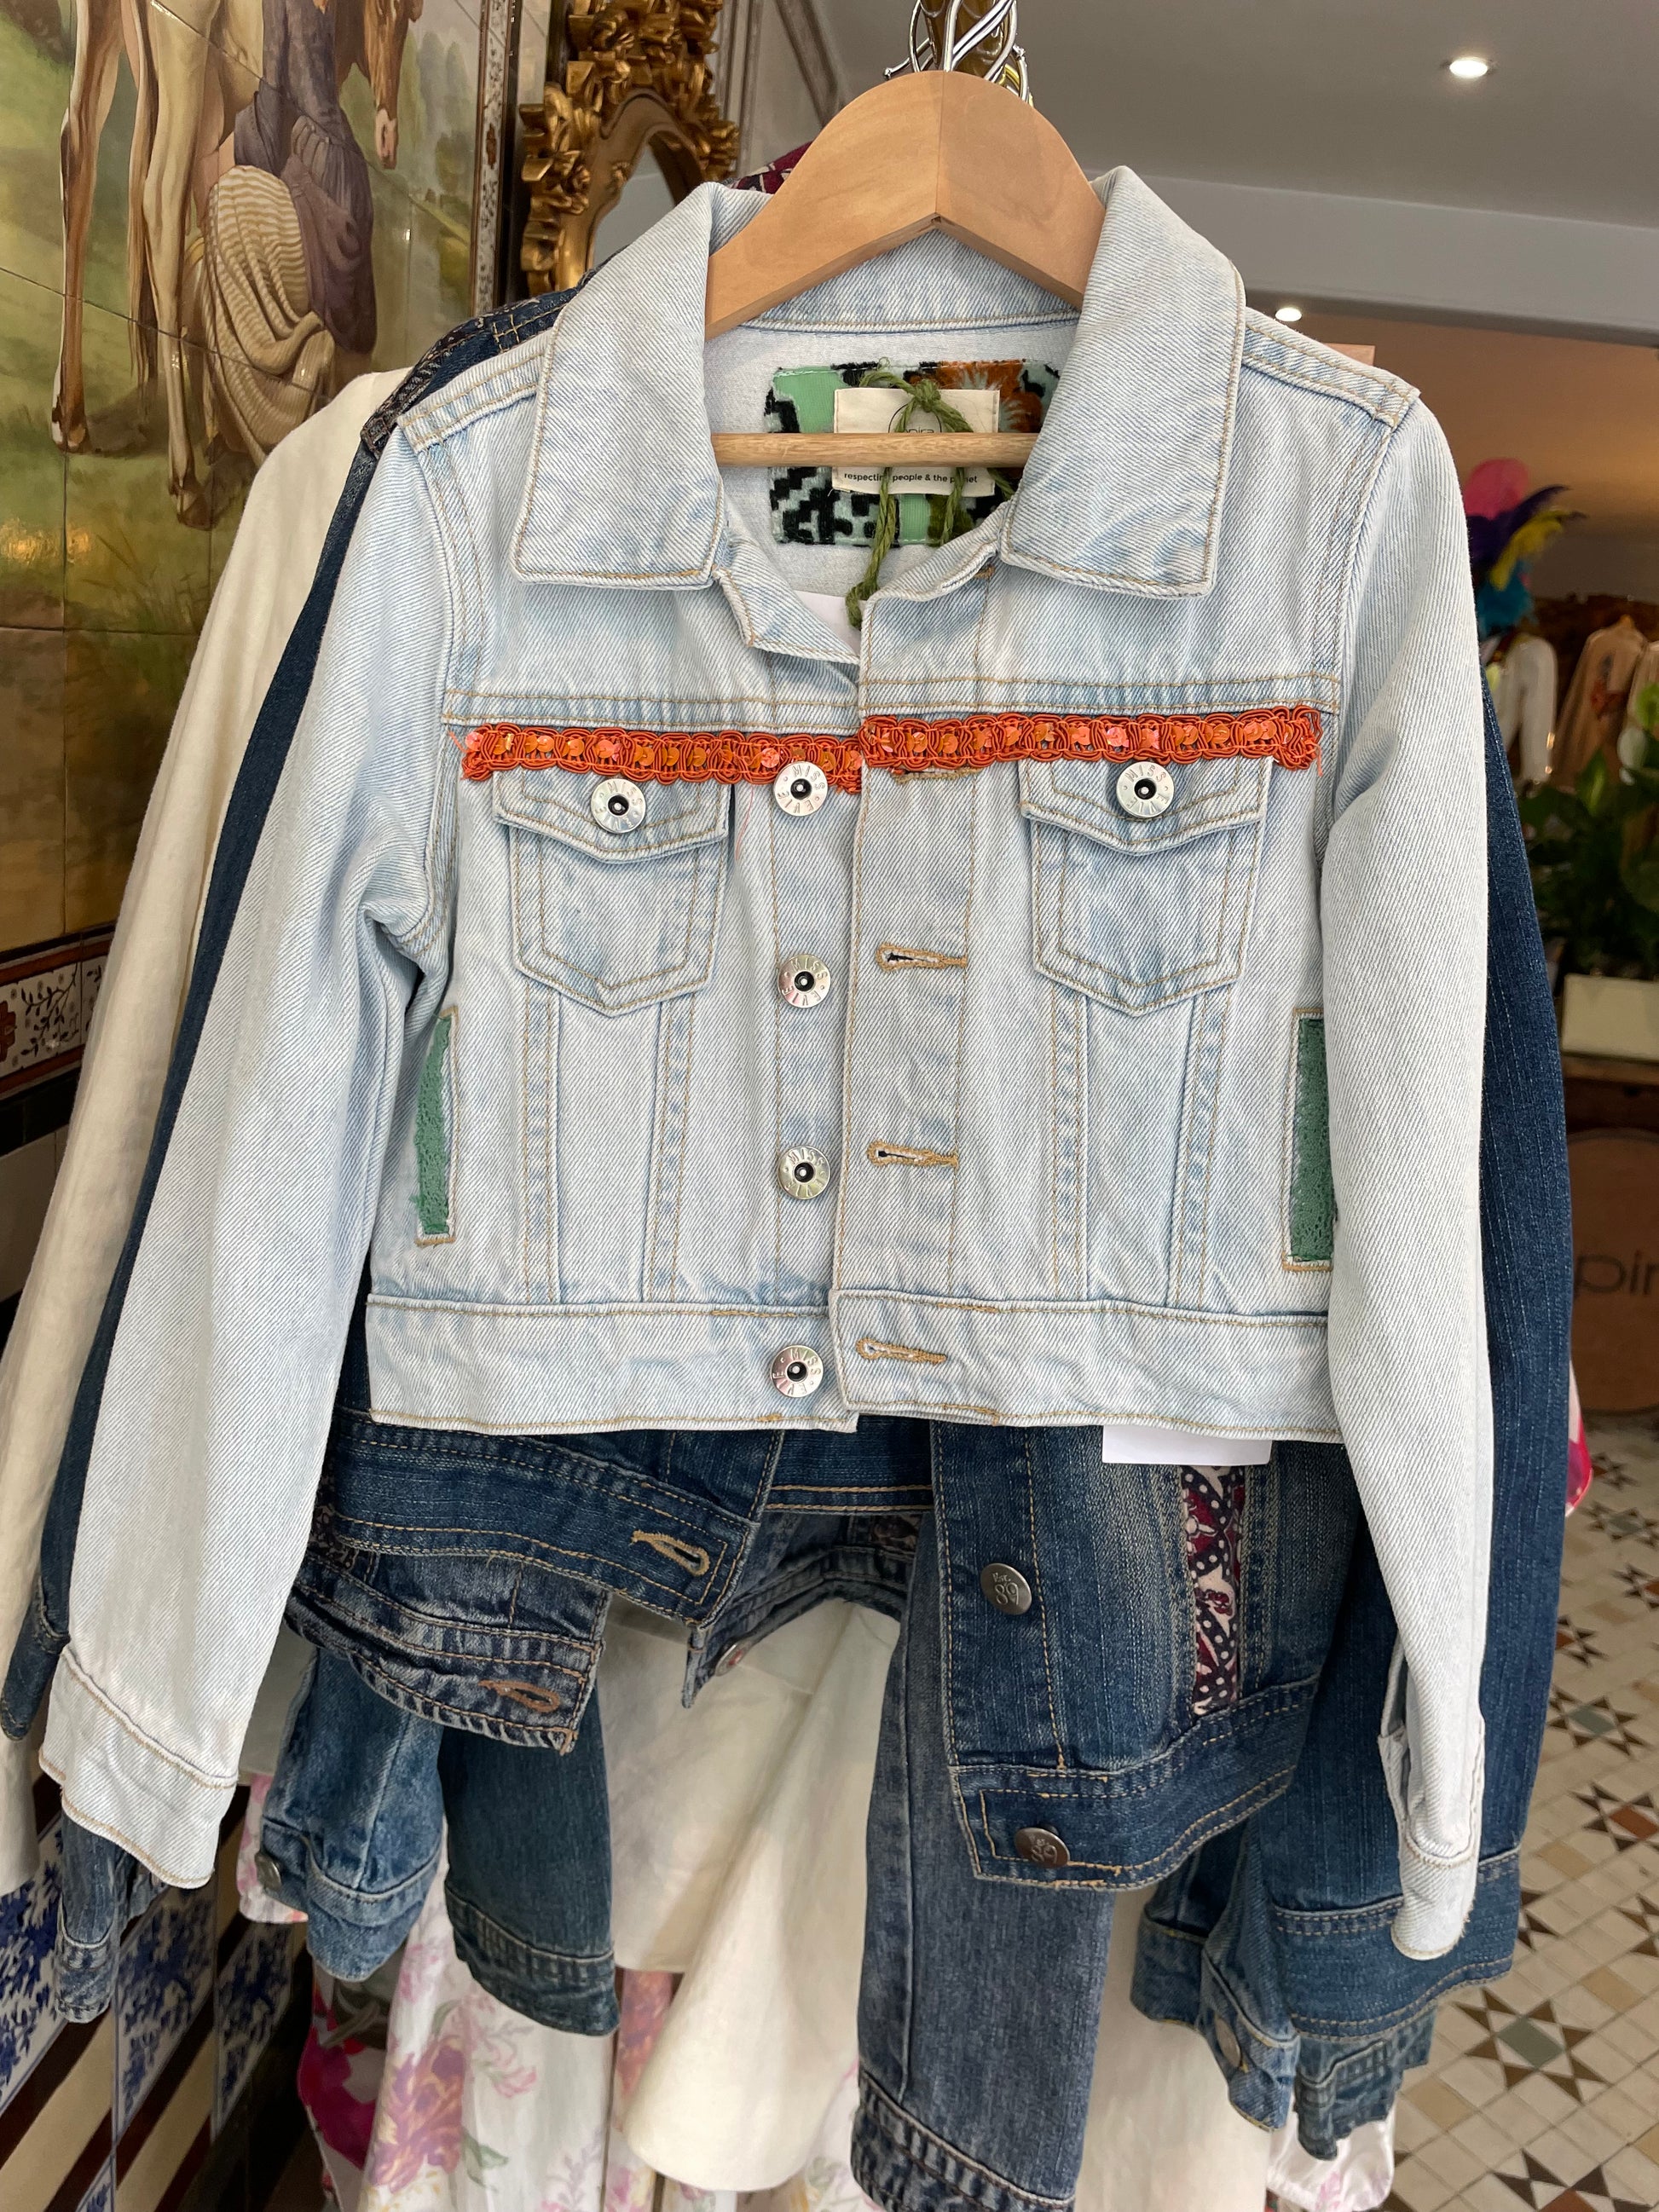 An Upcycled Children's Denim Jacket from mpira.